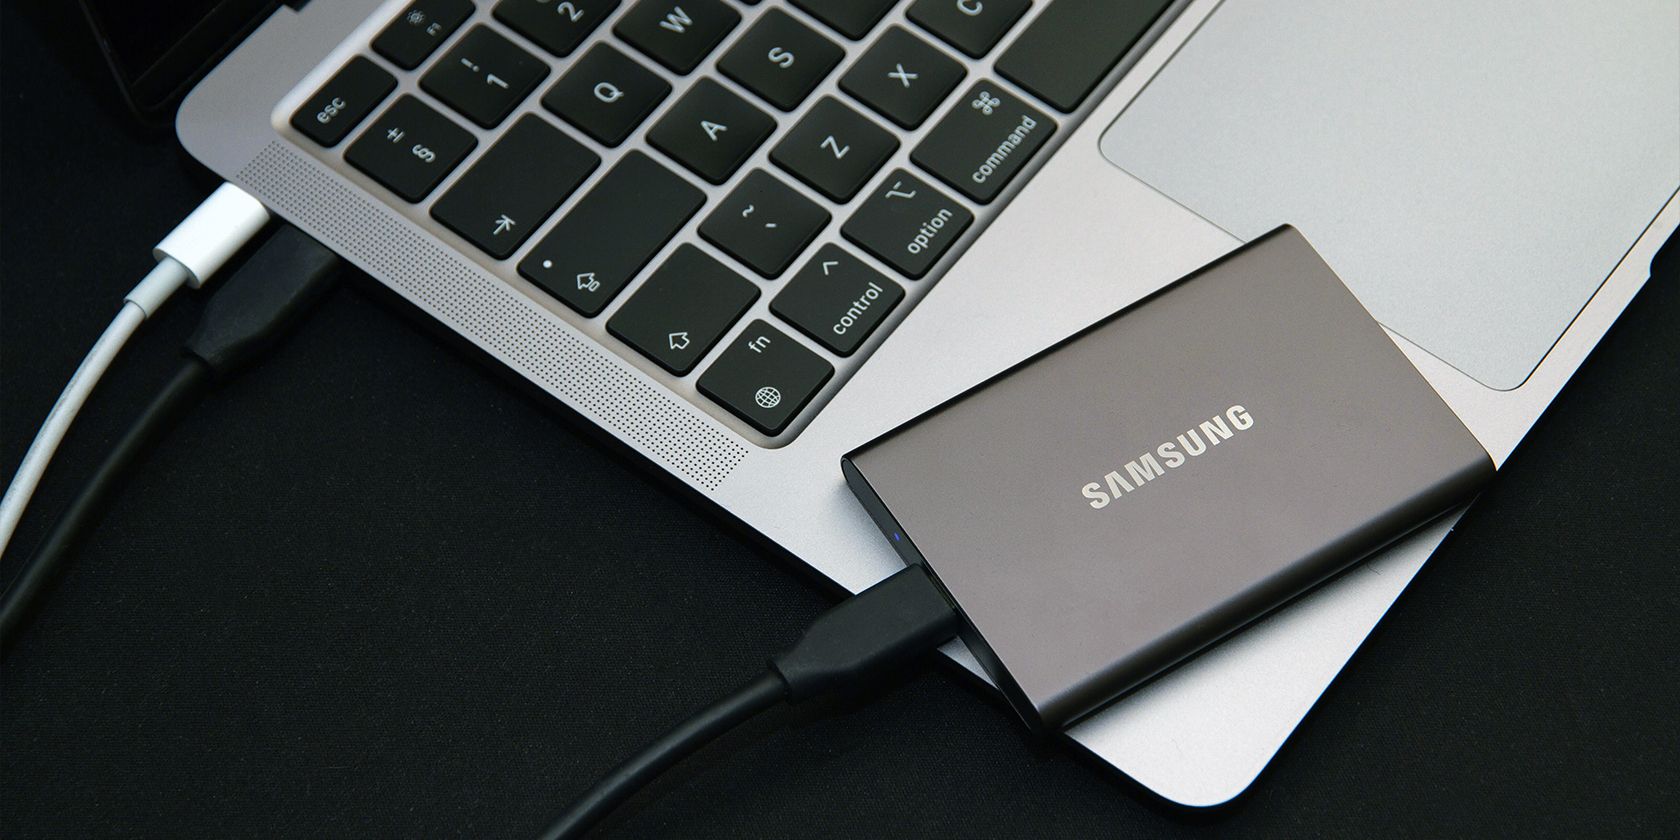 Samsung SSD backing up files on a MacBook